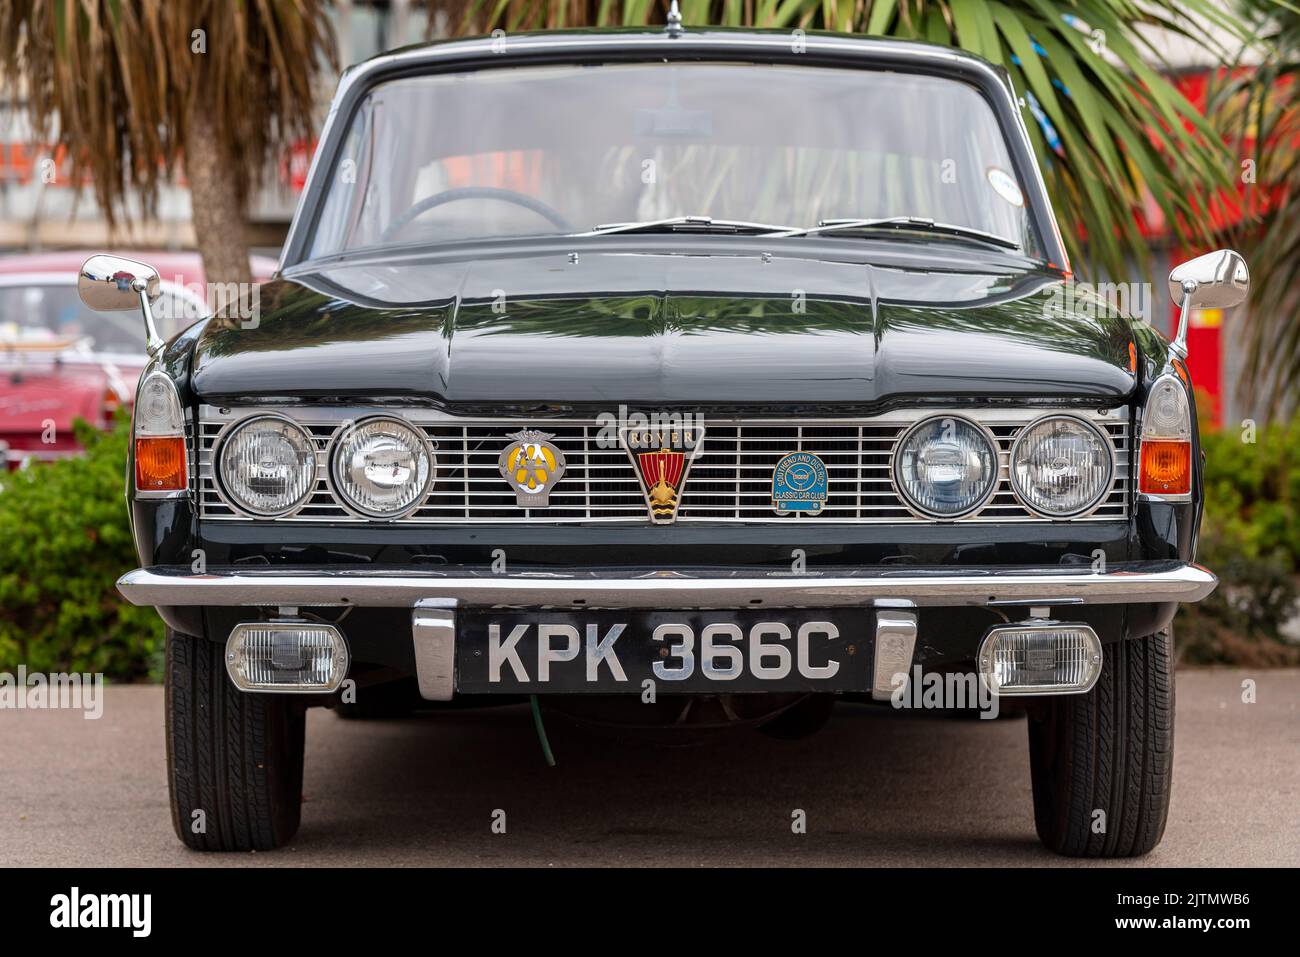 1965 Rover P6, Rover 2000 saloon car on show on Marine Parade, Southend on Sea, Essex, UK. Front grill with vintage AA badge. Rover logo Stock Photo